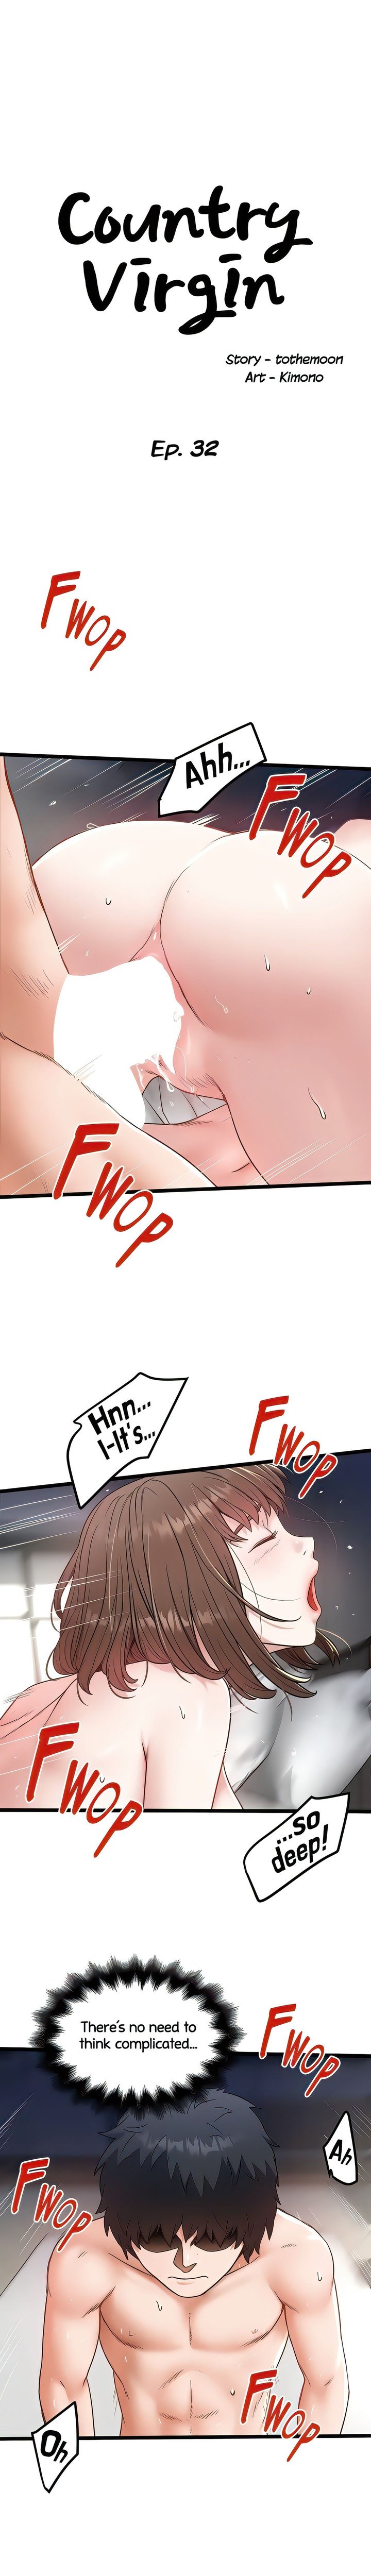 a-bachelor-in-the-country-chap-32-0